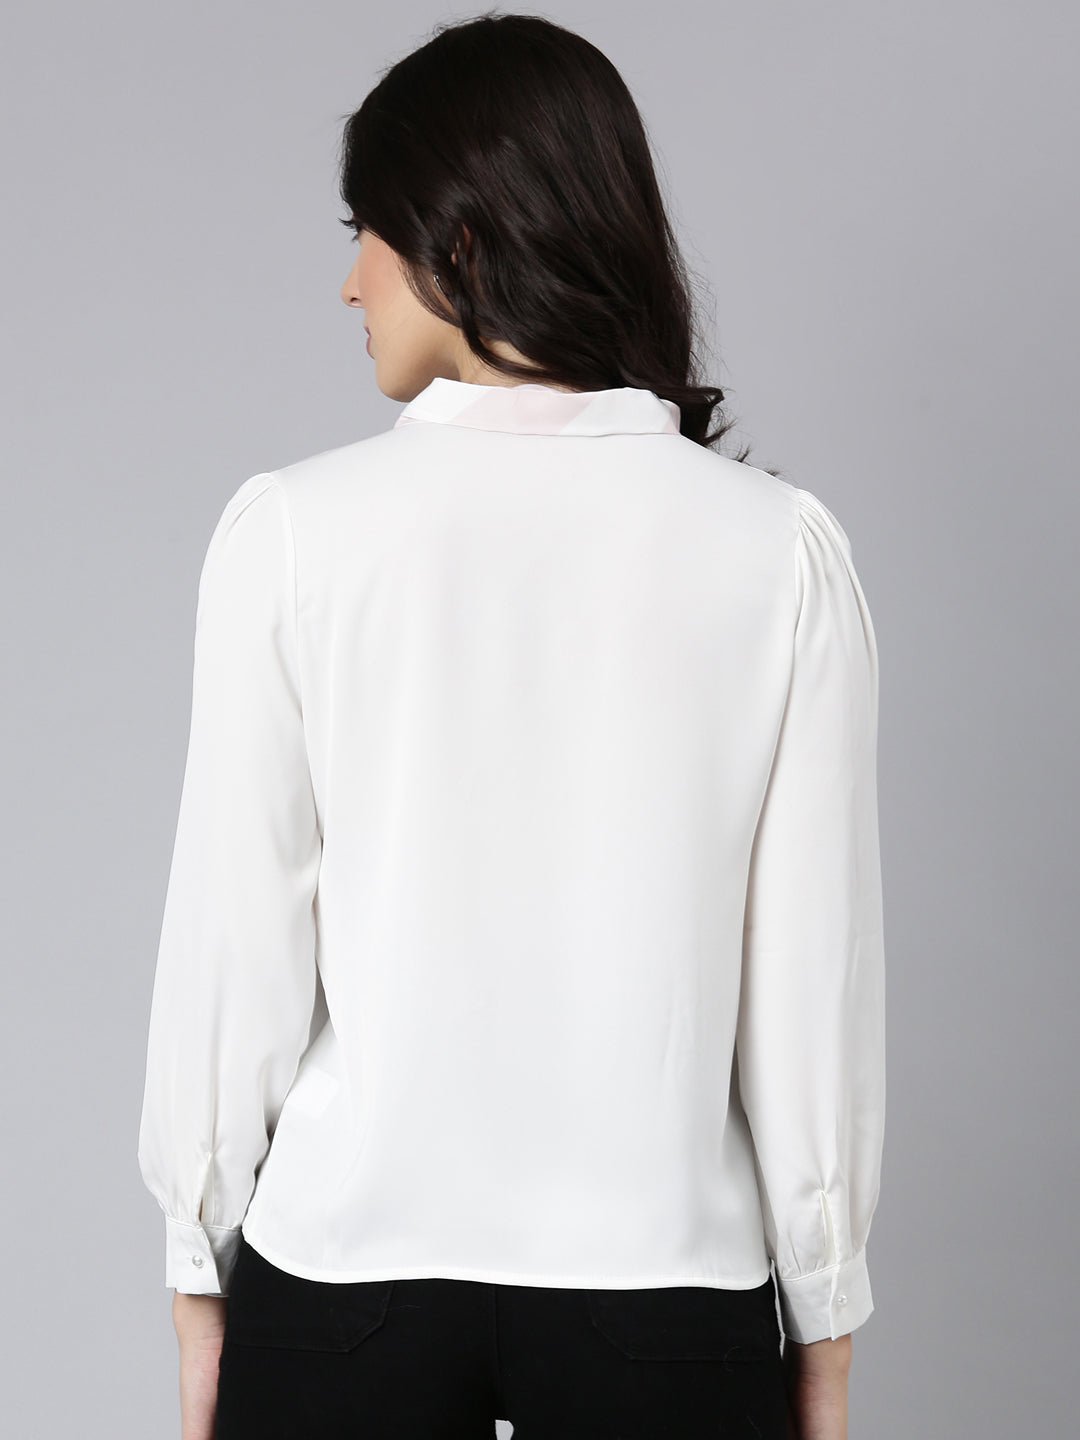 Women Solid Shirt Style Off White Top